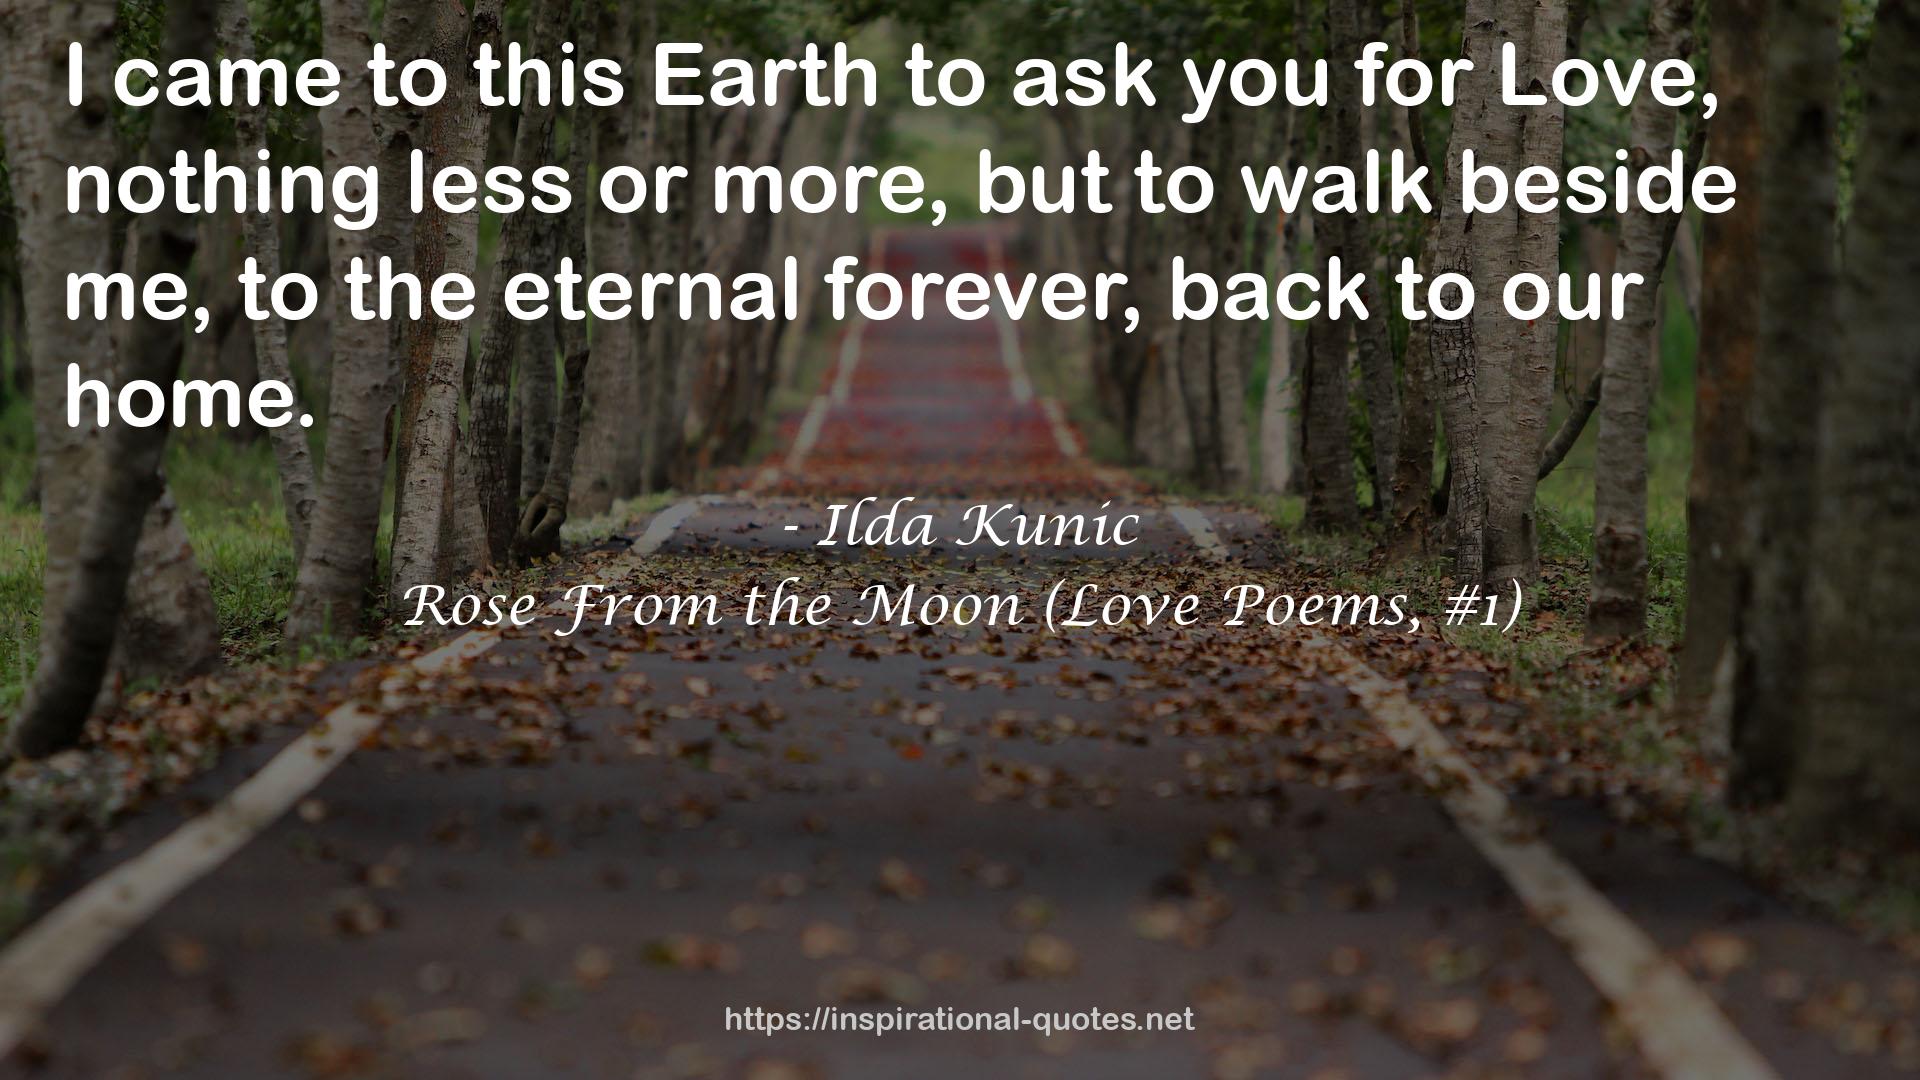 Rose From the Moon (Love Poems, #1) QUOTES